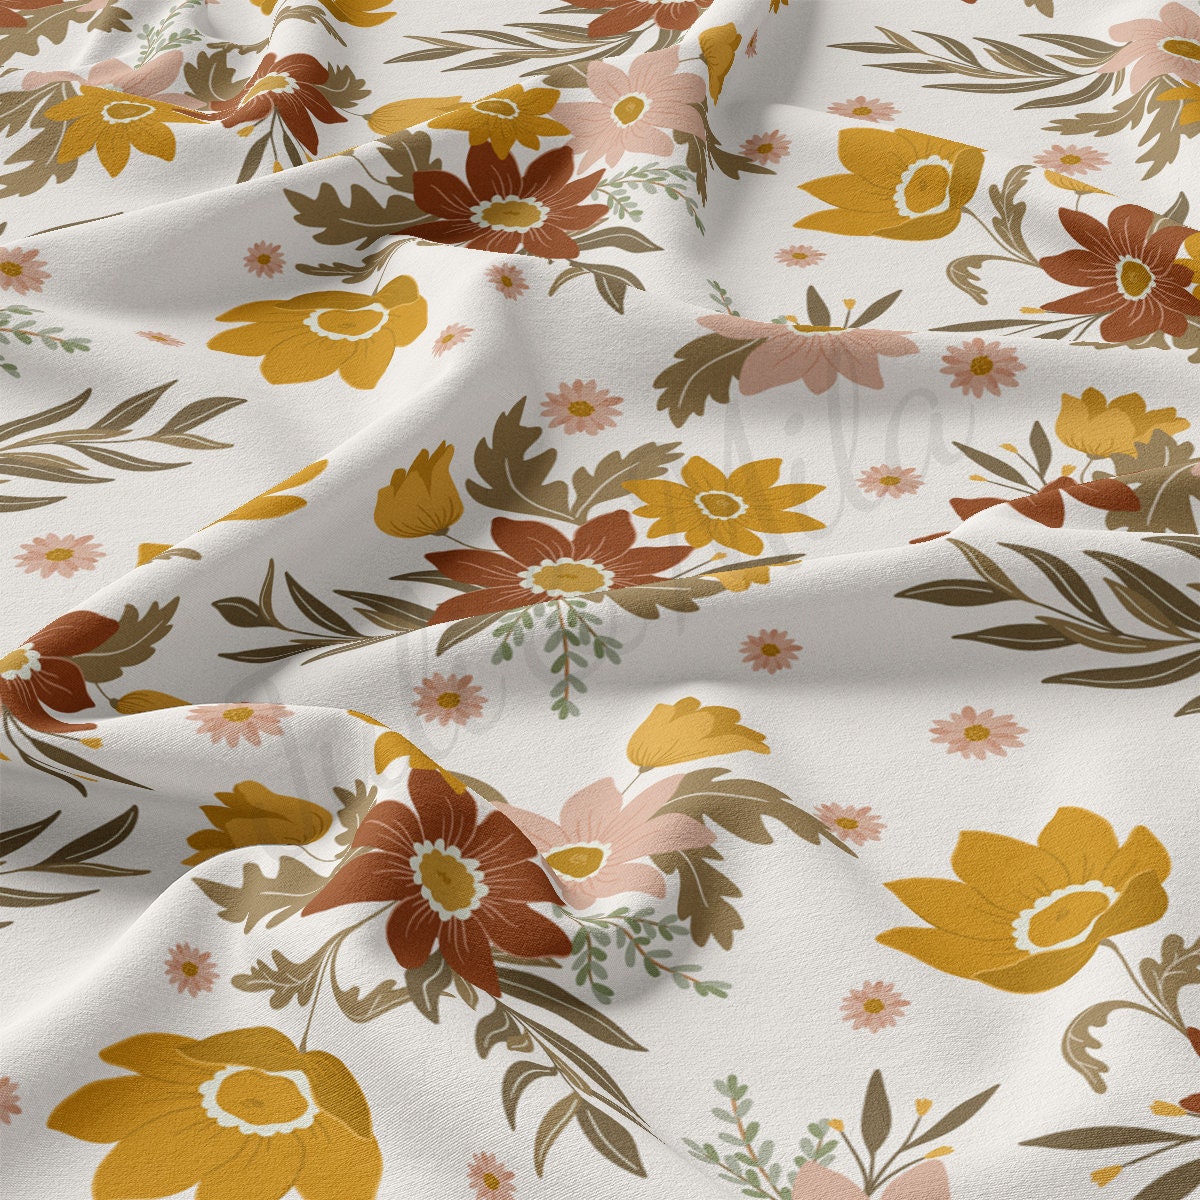 Floral DBP Fabric Double Brushed Polyester Fabric by the Yard DBP Jersey Stretchy Soft Polyester Stretch Fabric DBP2176